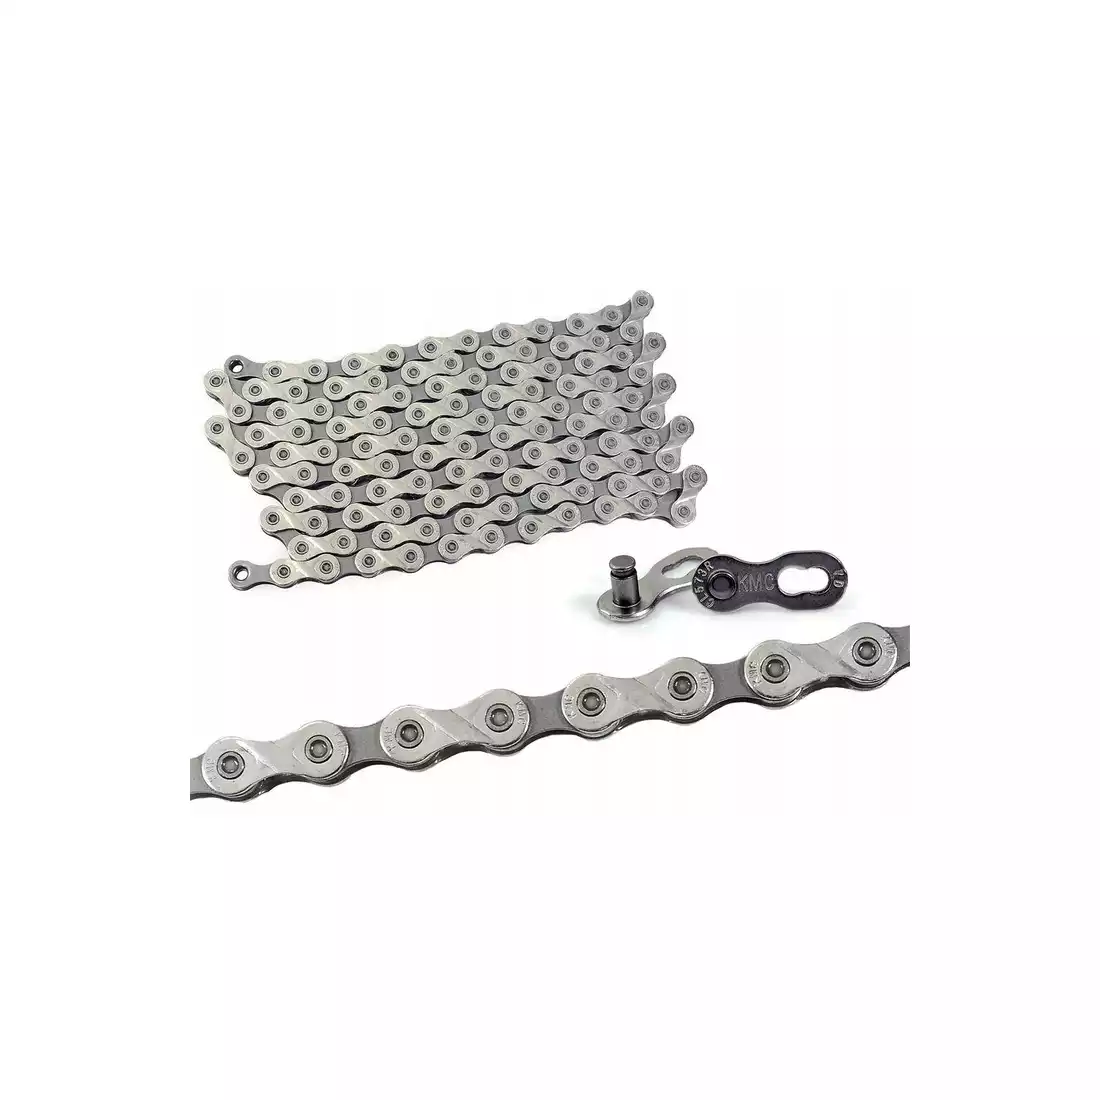 KMC X8 bicycle chain, 8 rows, 116 links, silver gray